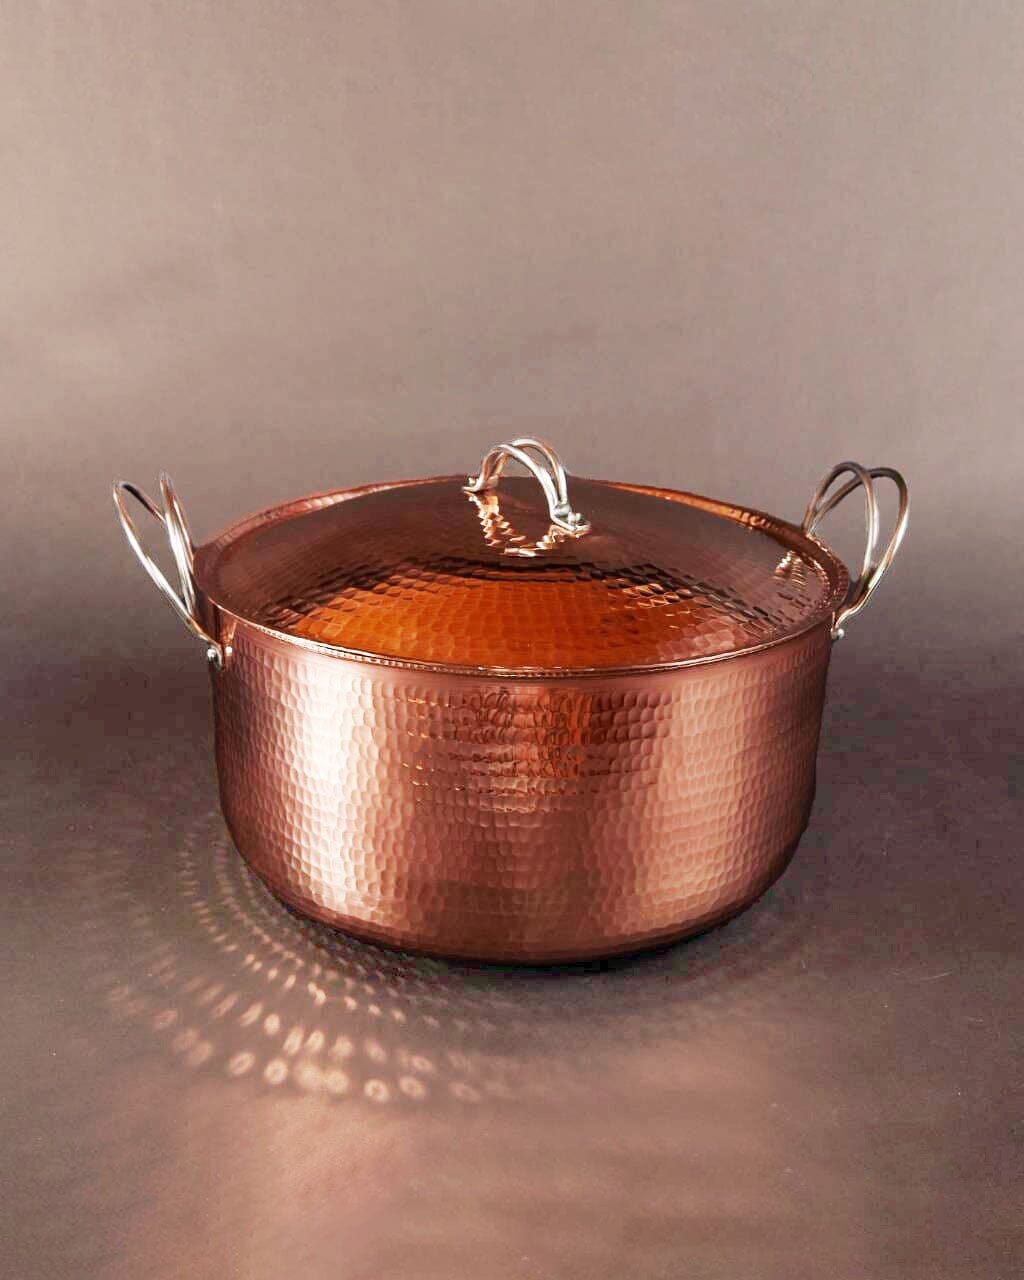 Sertodo Charger Plate 12 inch Round Hammered Copper